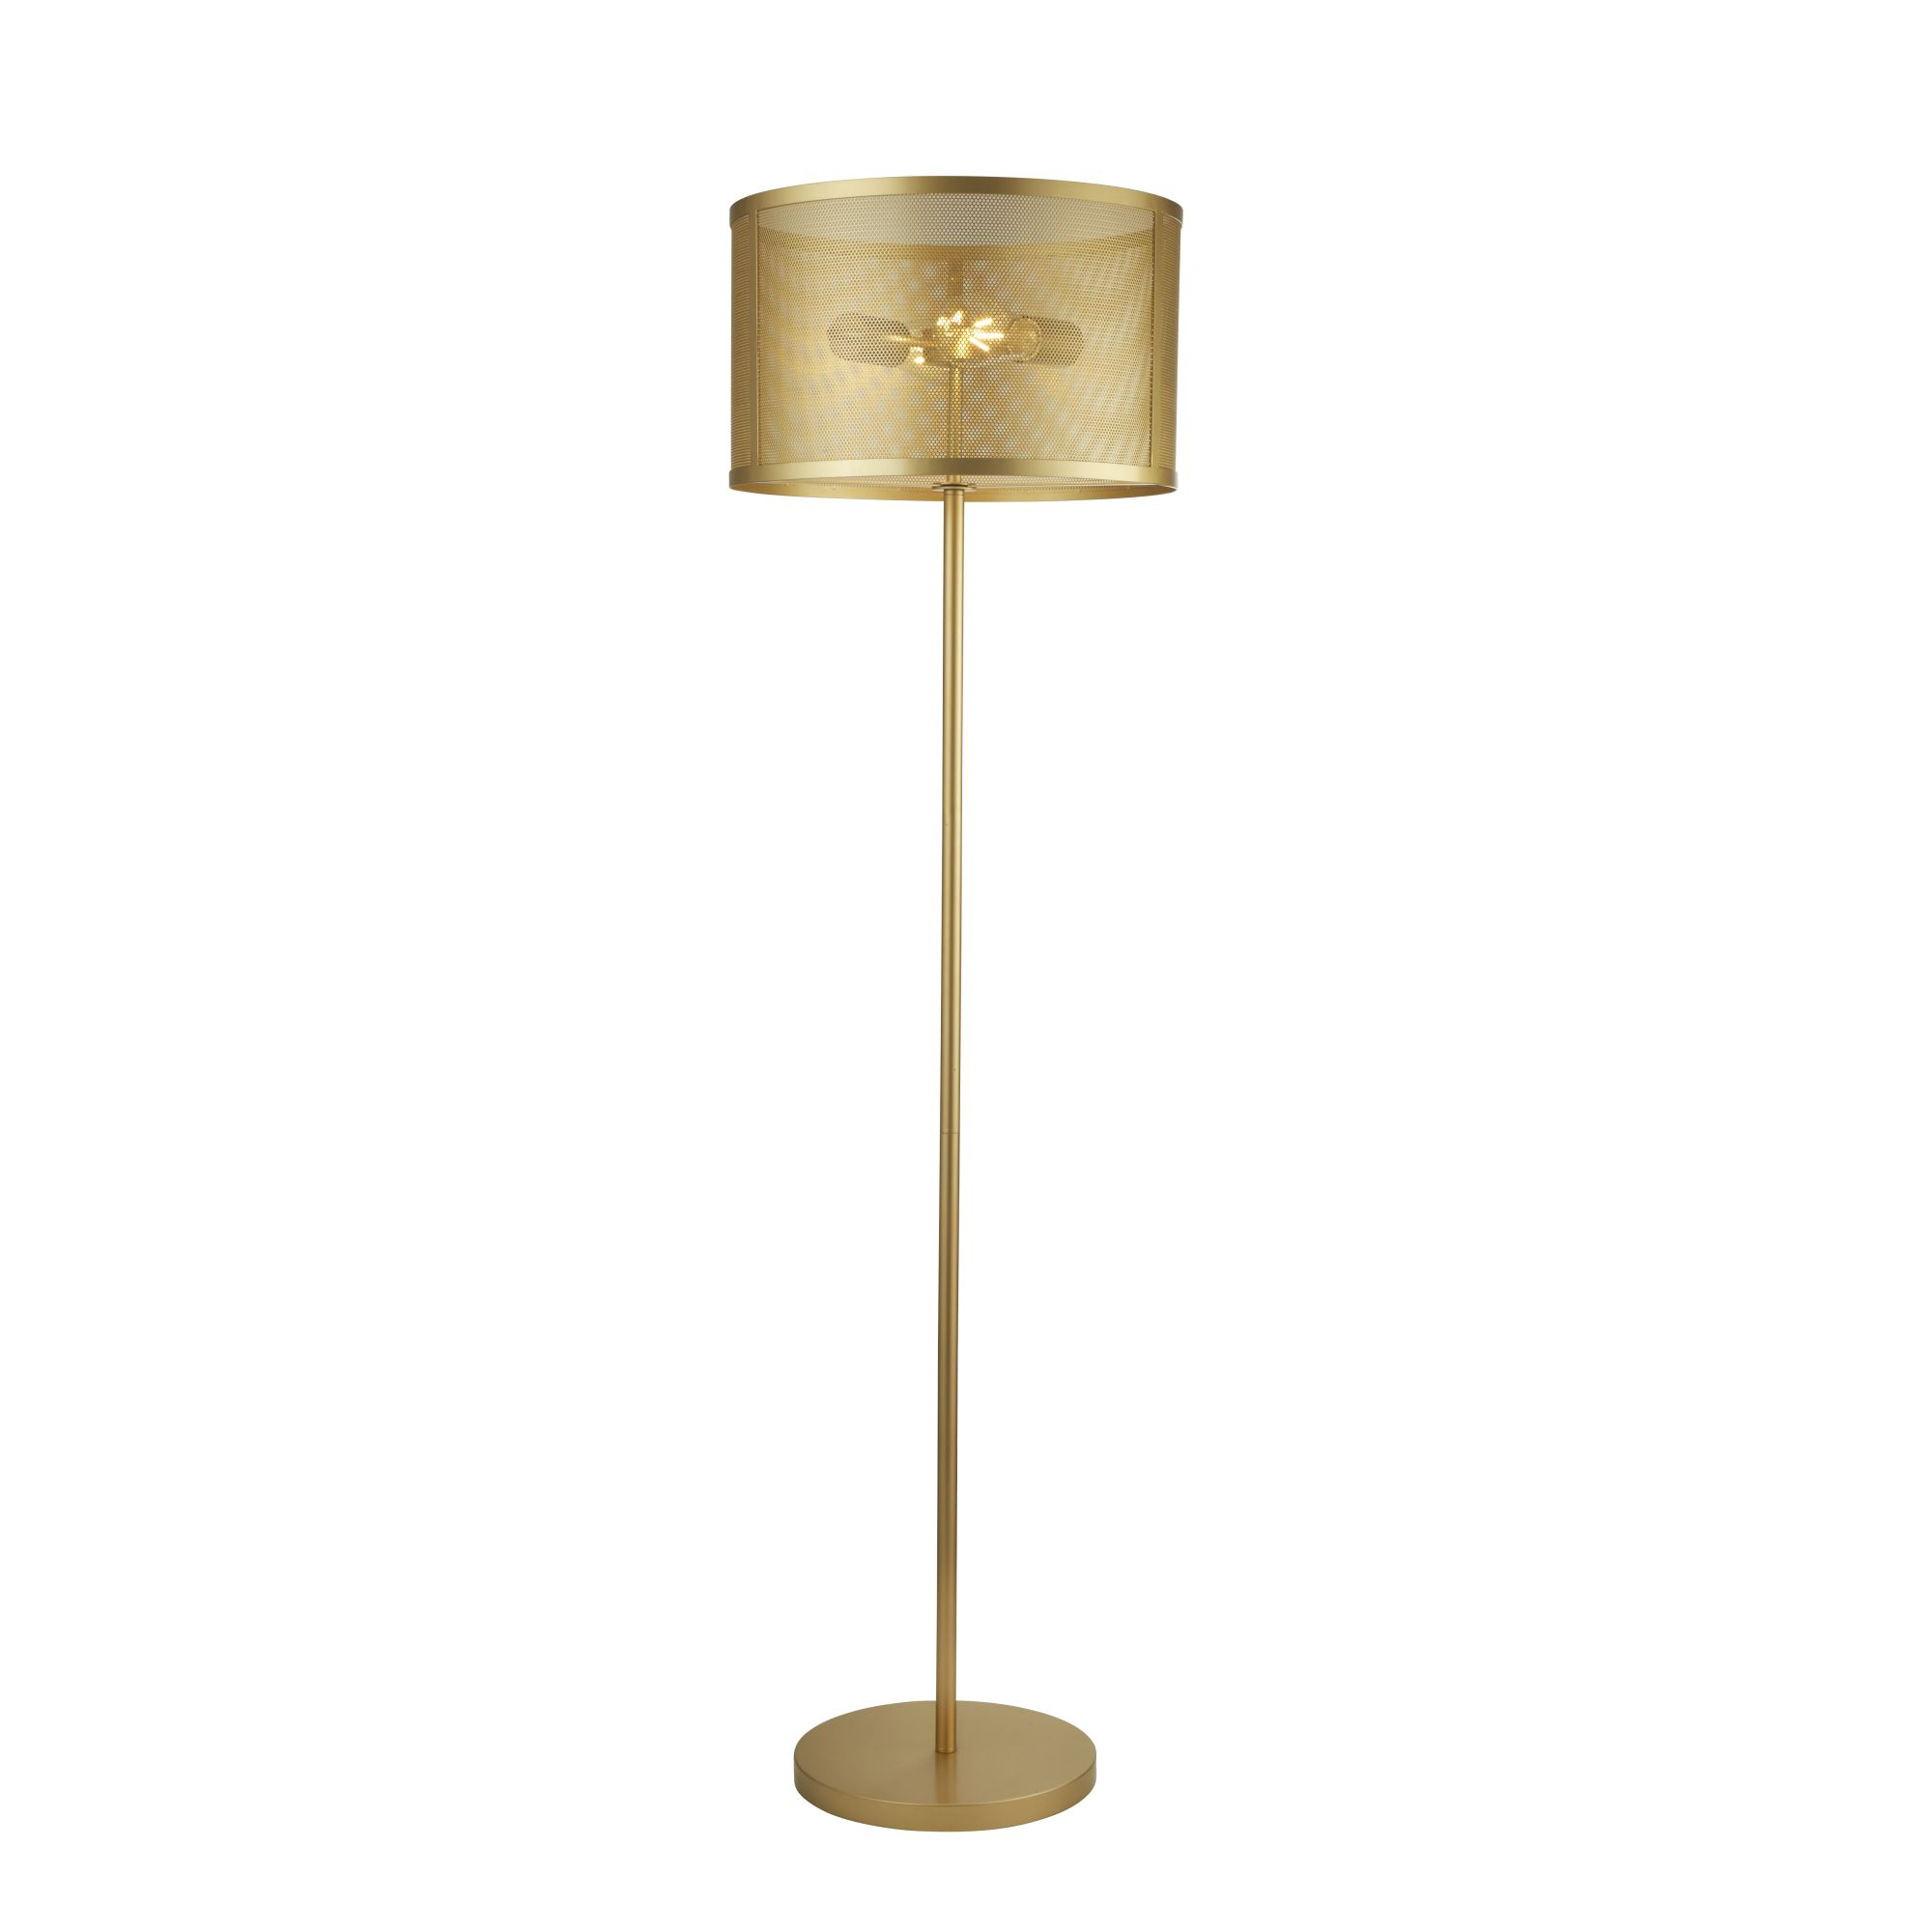 Details About Searchlight Fishnet 2 Light Floor Lamp Matt Gold within size 2000 X 2000